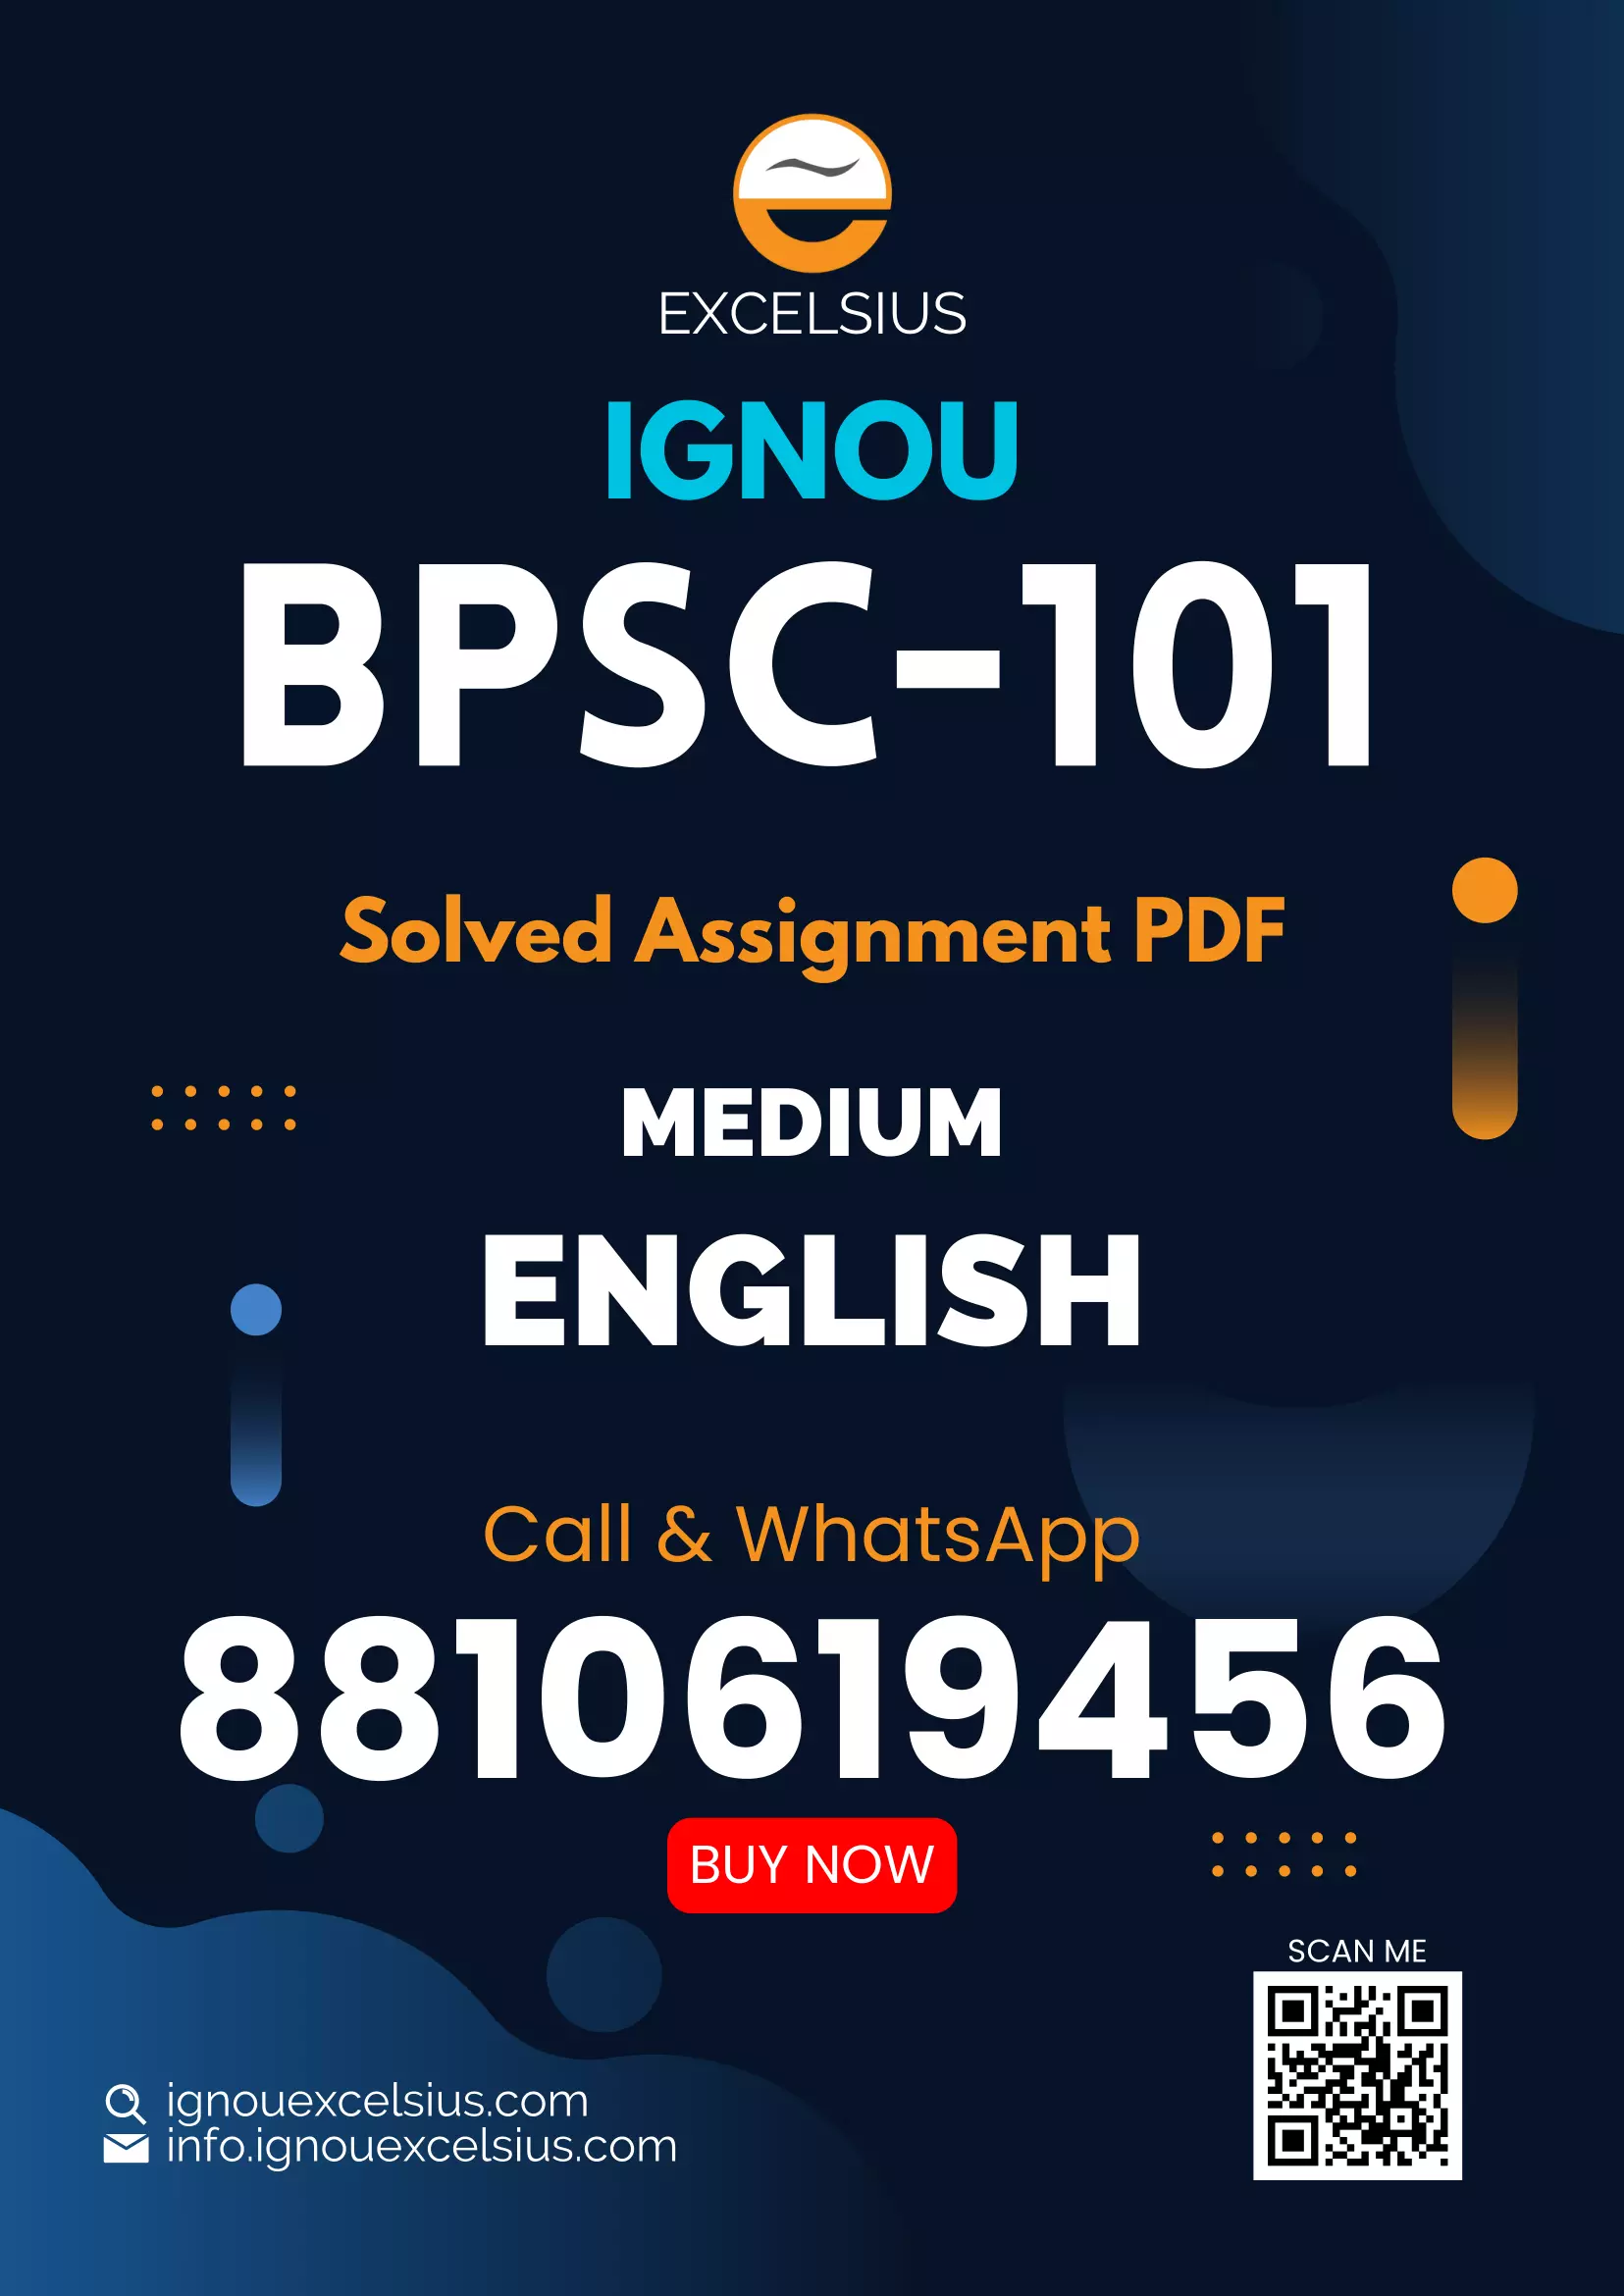 IGNOU BPSC-101 - Understanding Political Theory, Latest Solved Assignment-July 2022 – January 2023